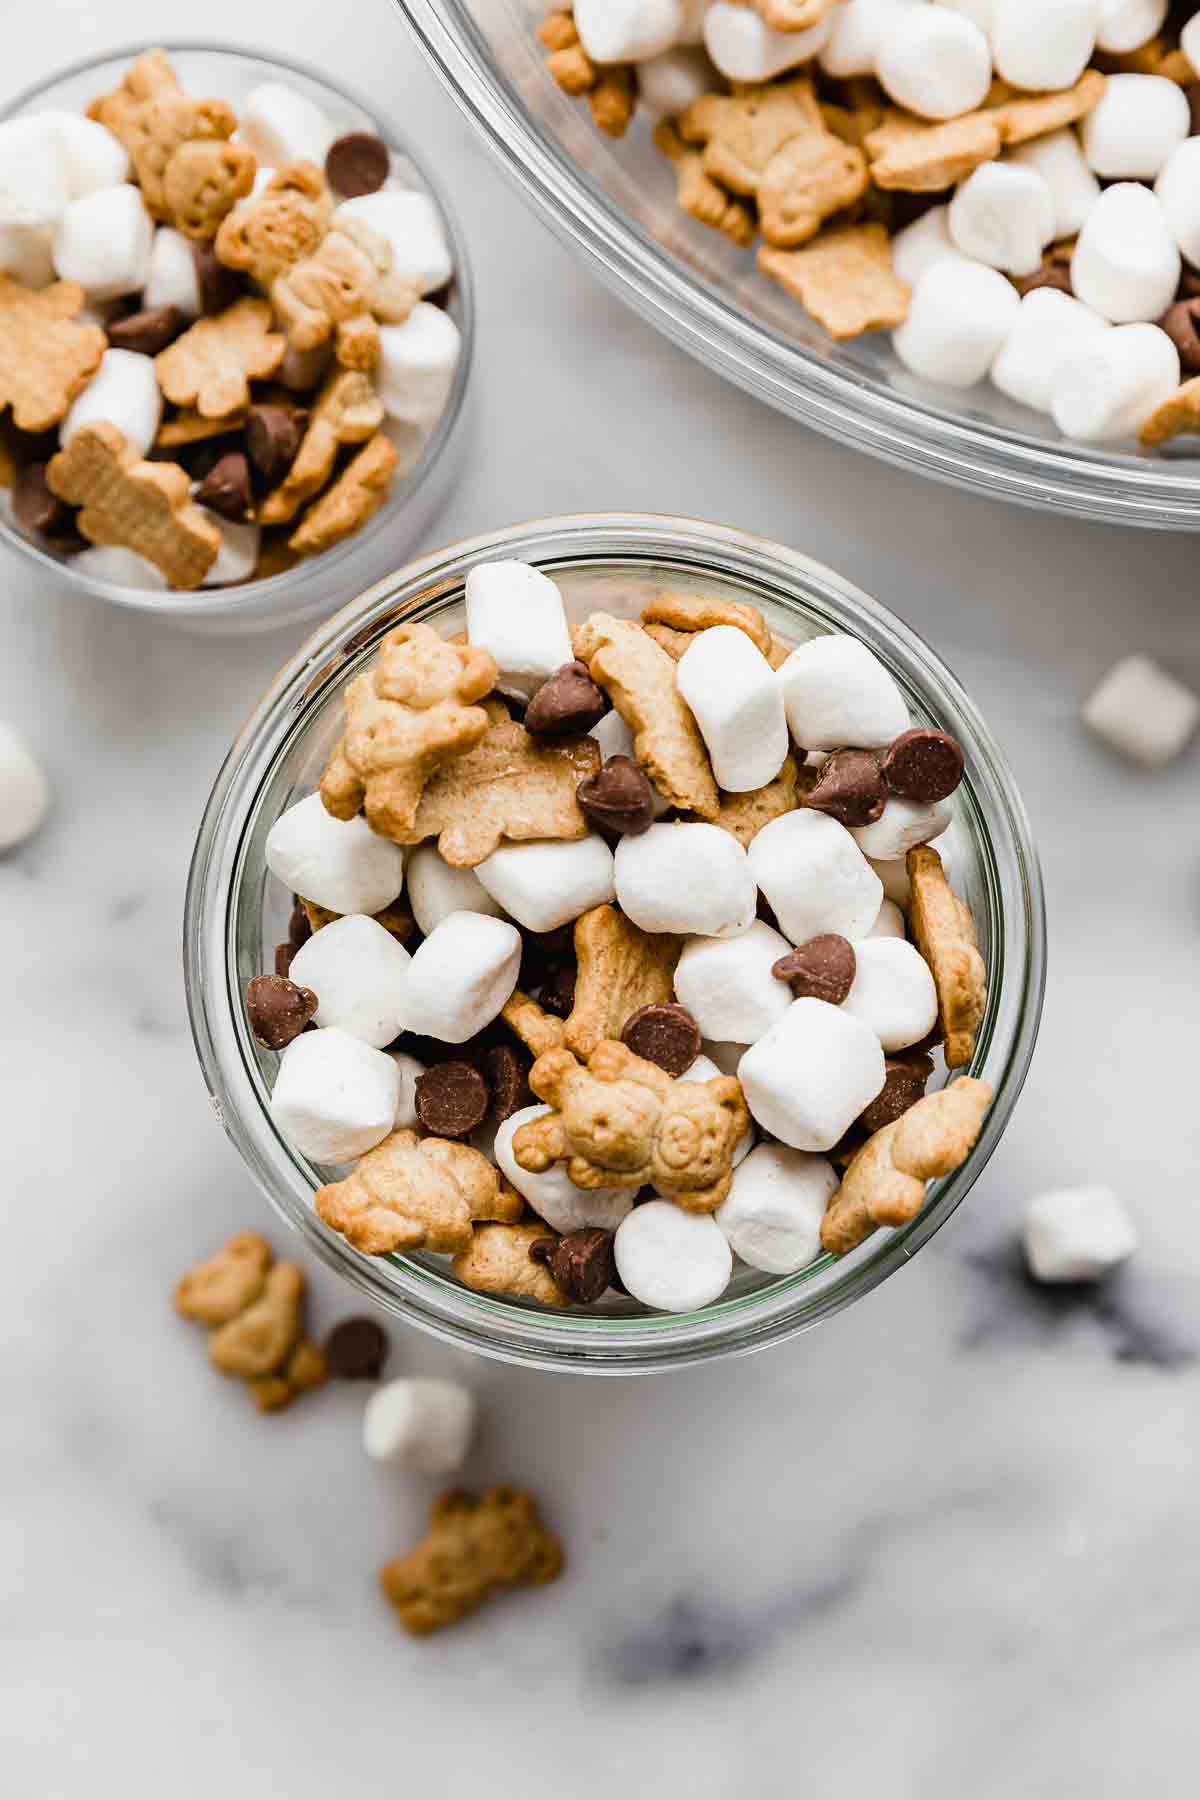 S'mores Mix in a glass cup on a white marble background, the S'mores trail mix consists of mini marshmallows, teddy grahams, and milk chocolate chips.